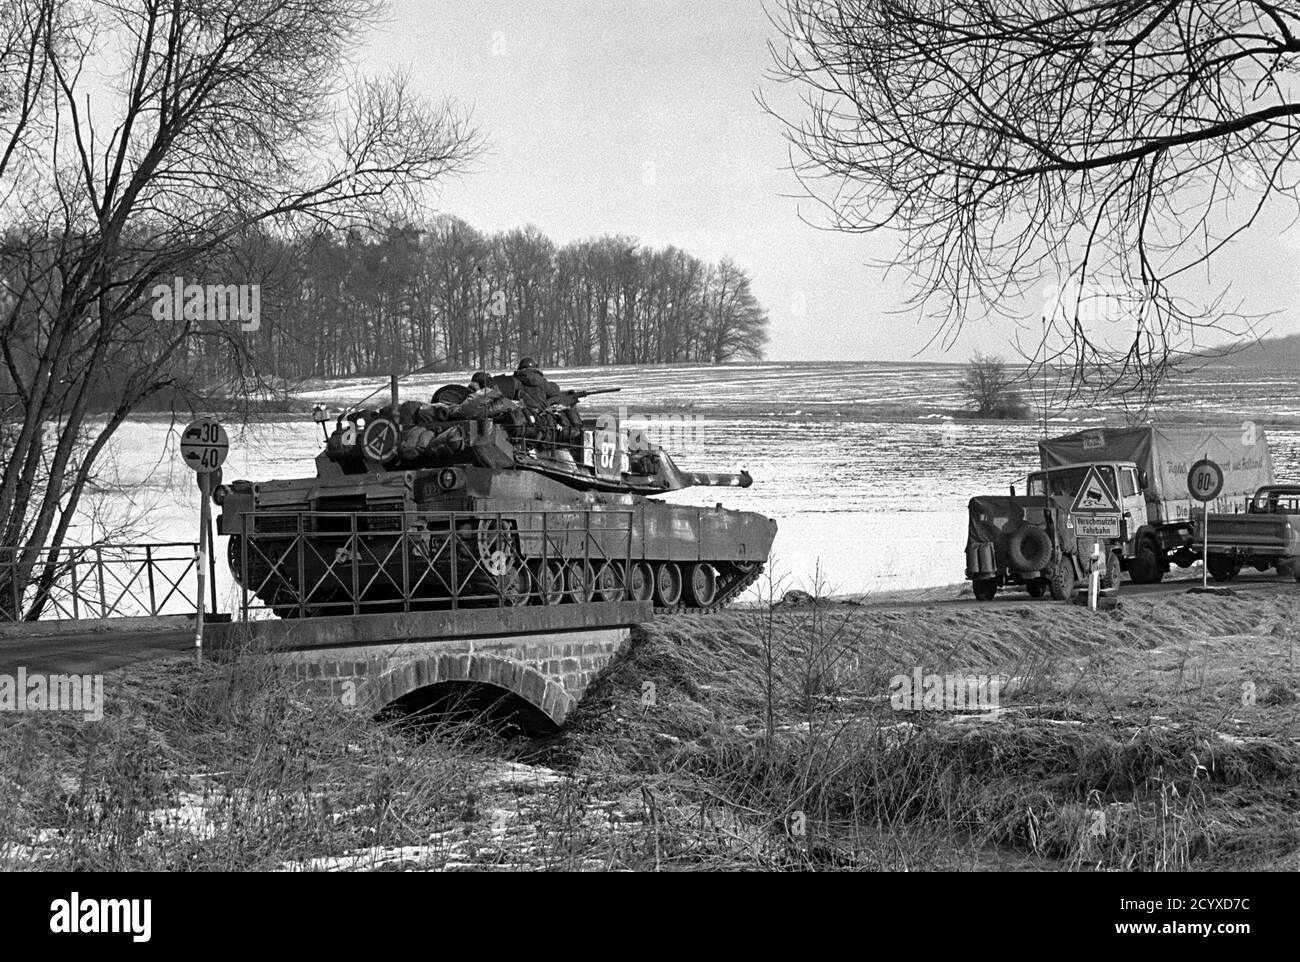 NATO exercises in Germany, M1 Abrams US Army tank (January 1985) Stock Photo